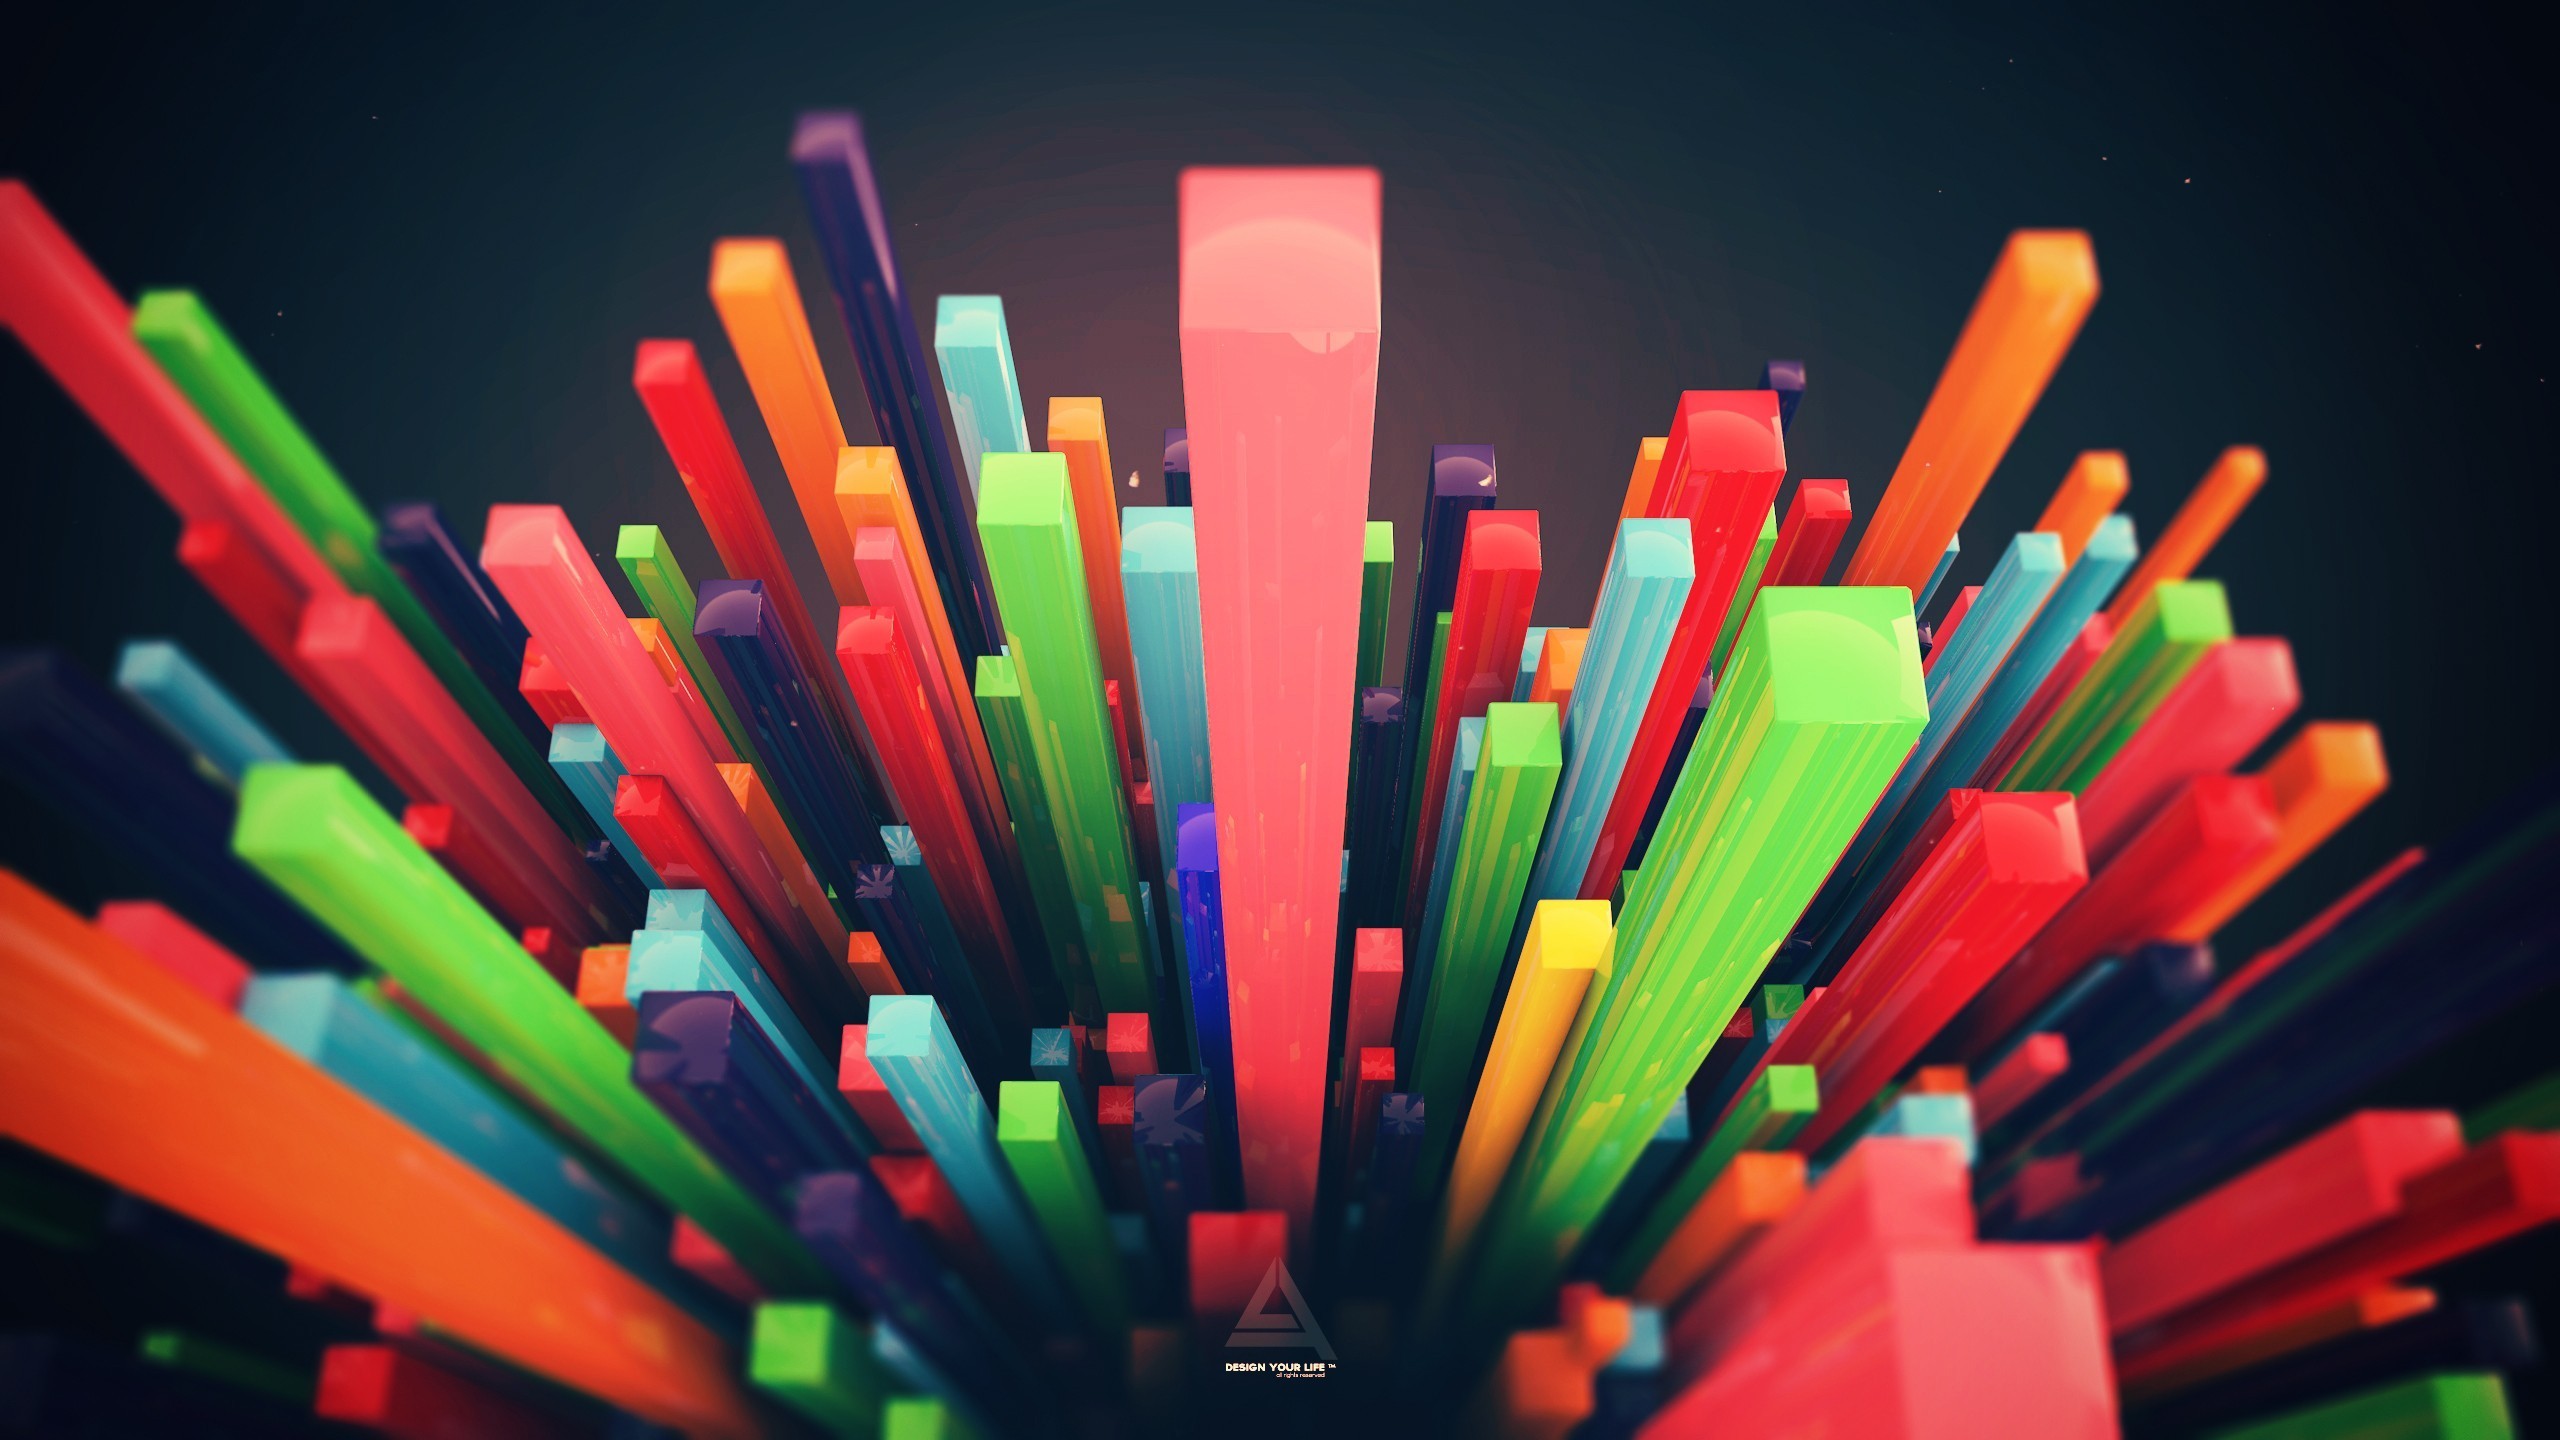 Abstract Colorful Depth Of Field Digital Art Colorful Minimalism Artwork Abstract Colorful Colorful  2560x1440